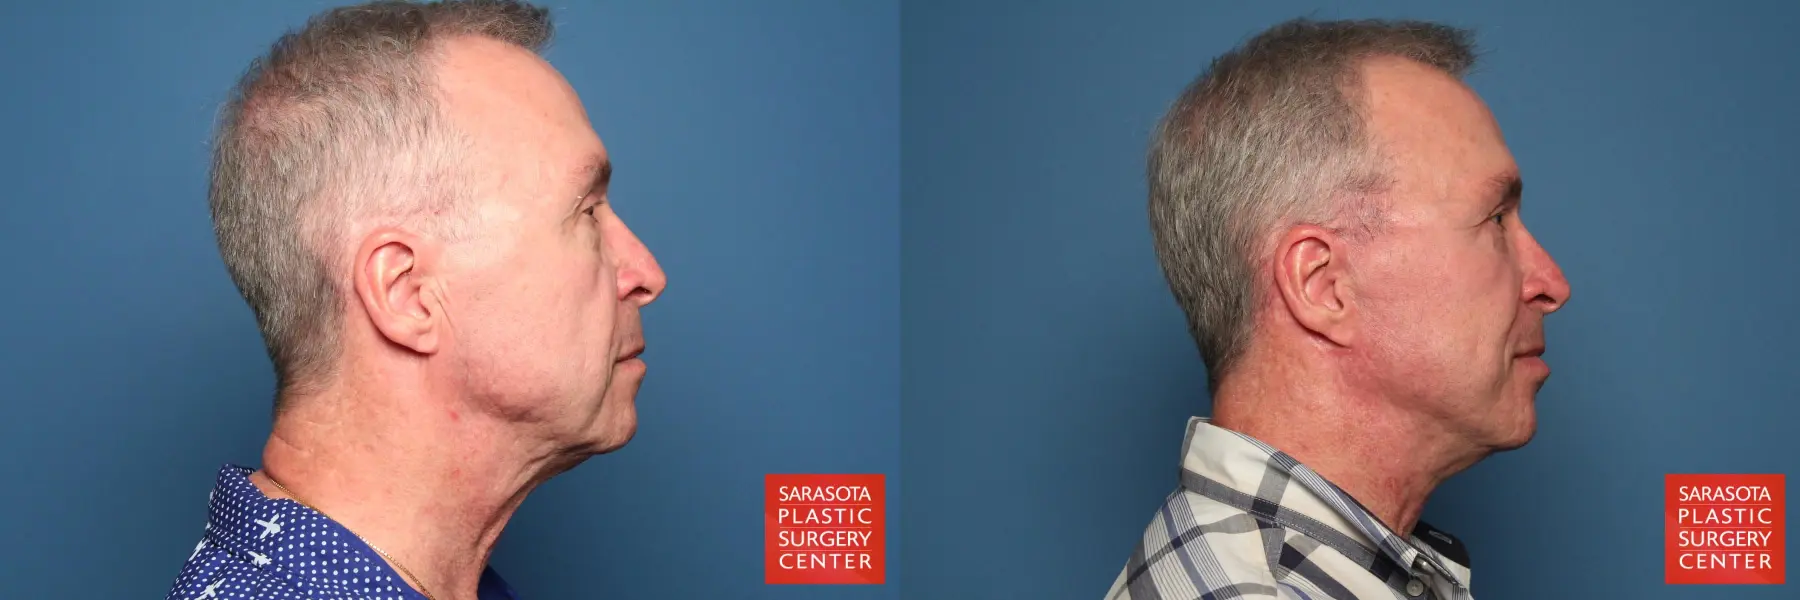 Facelift For Men: Patient 2 - Before and After 3